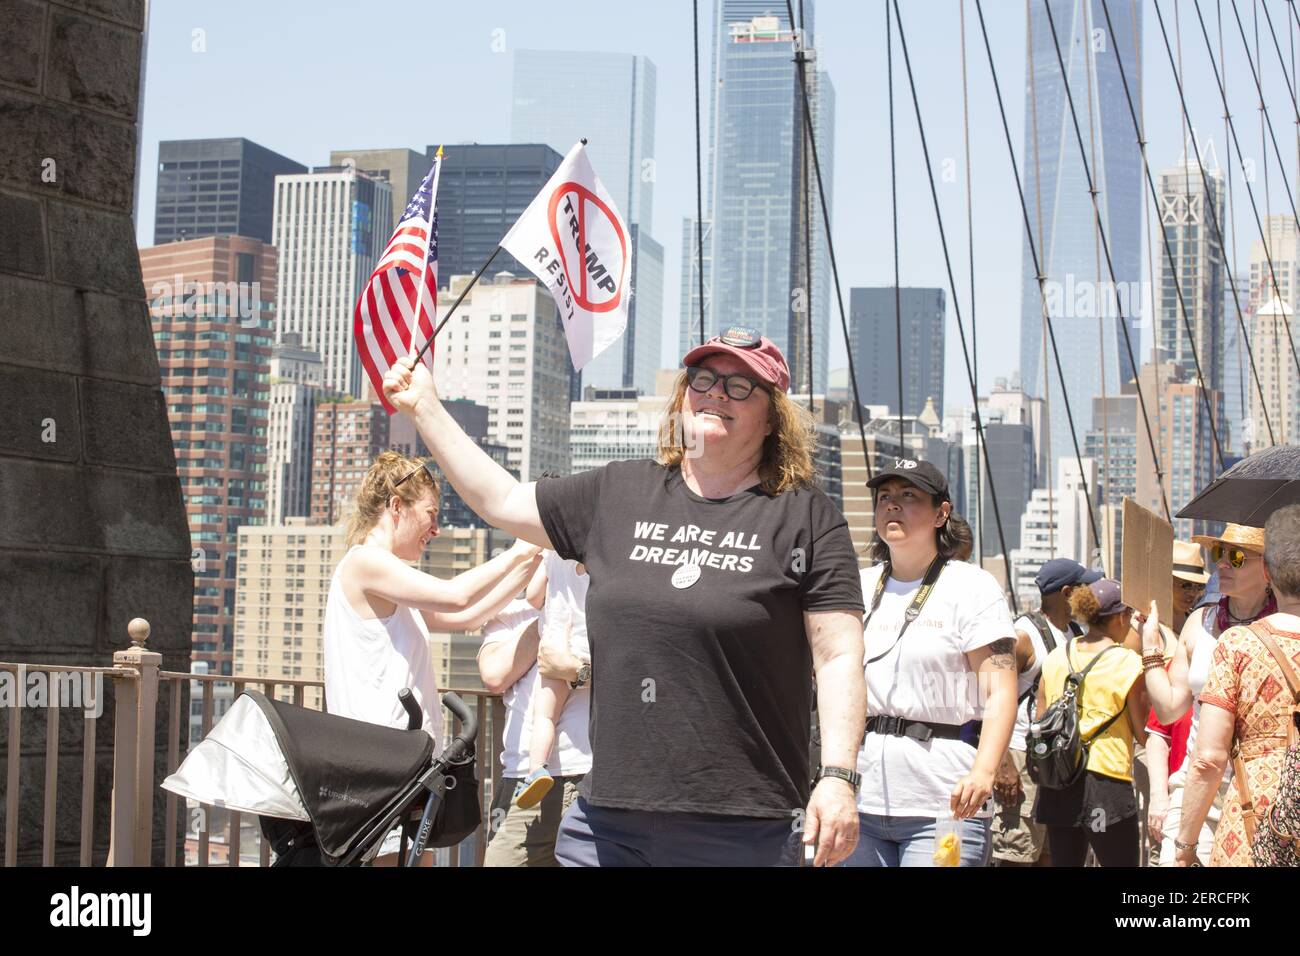 Protestors march across the Brooklyn Bridge during the march for National Day of Action: End Family Separation in New York, New York on June 30, 2018. Thousands of protestors marched from Foley Square over the Brooklyn Bridge to protest immigration raids across the country. (Photo by Erin Lefevre/Sipa USA) Stock Photo